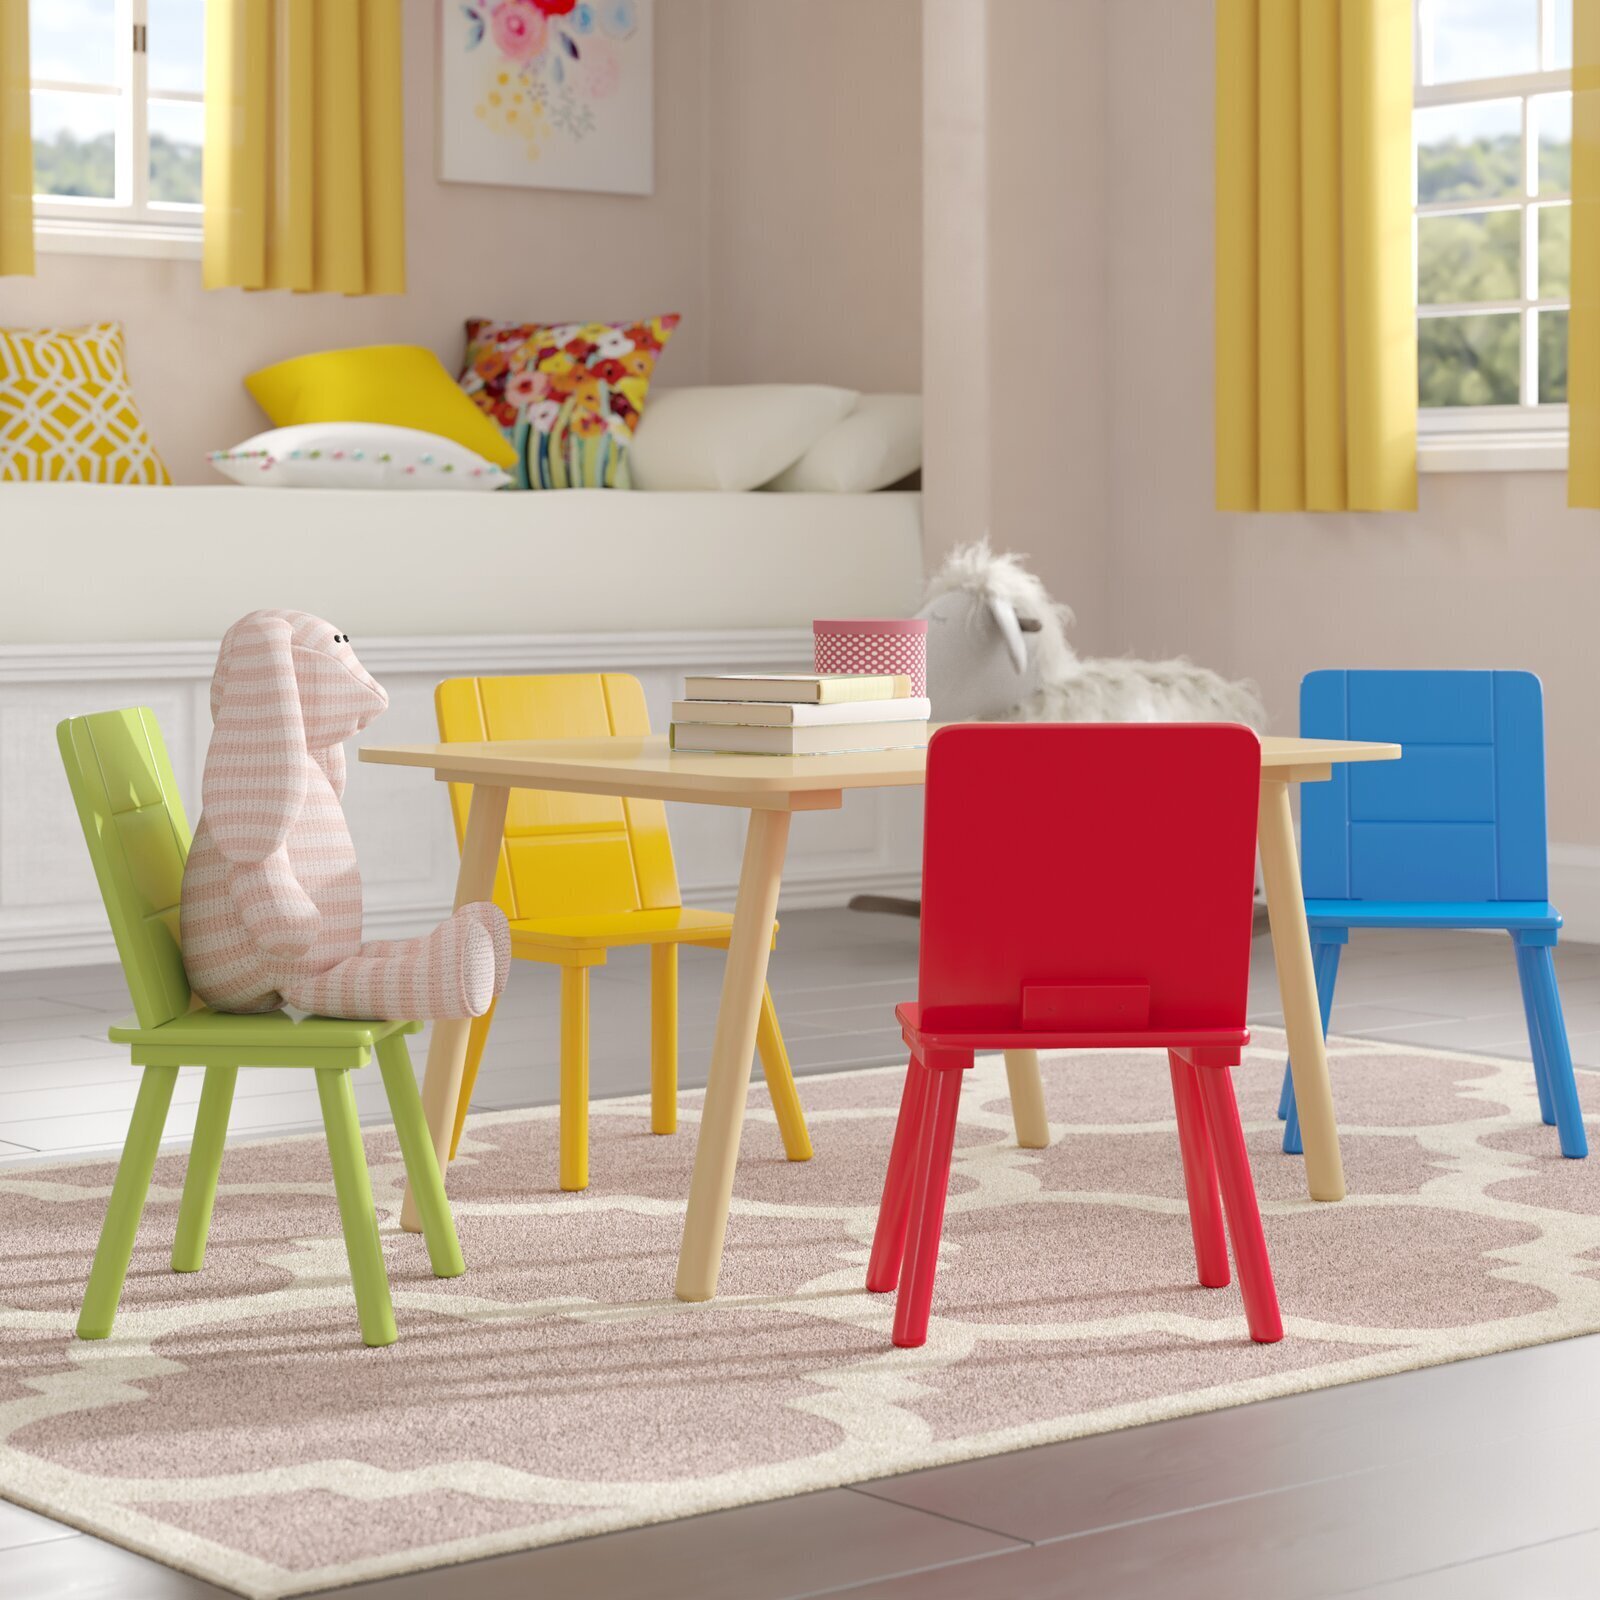 Five Piece Kids’ Wooden Table and Chairs 